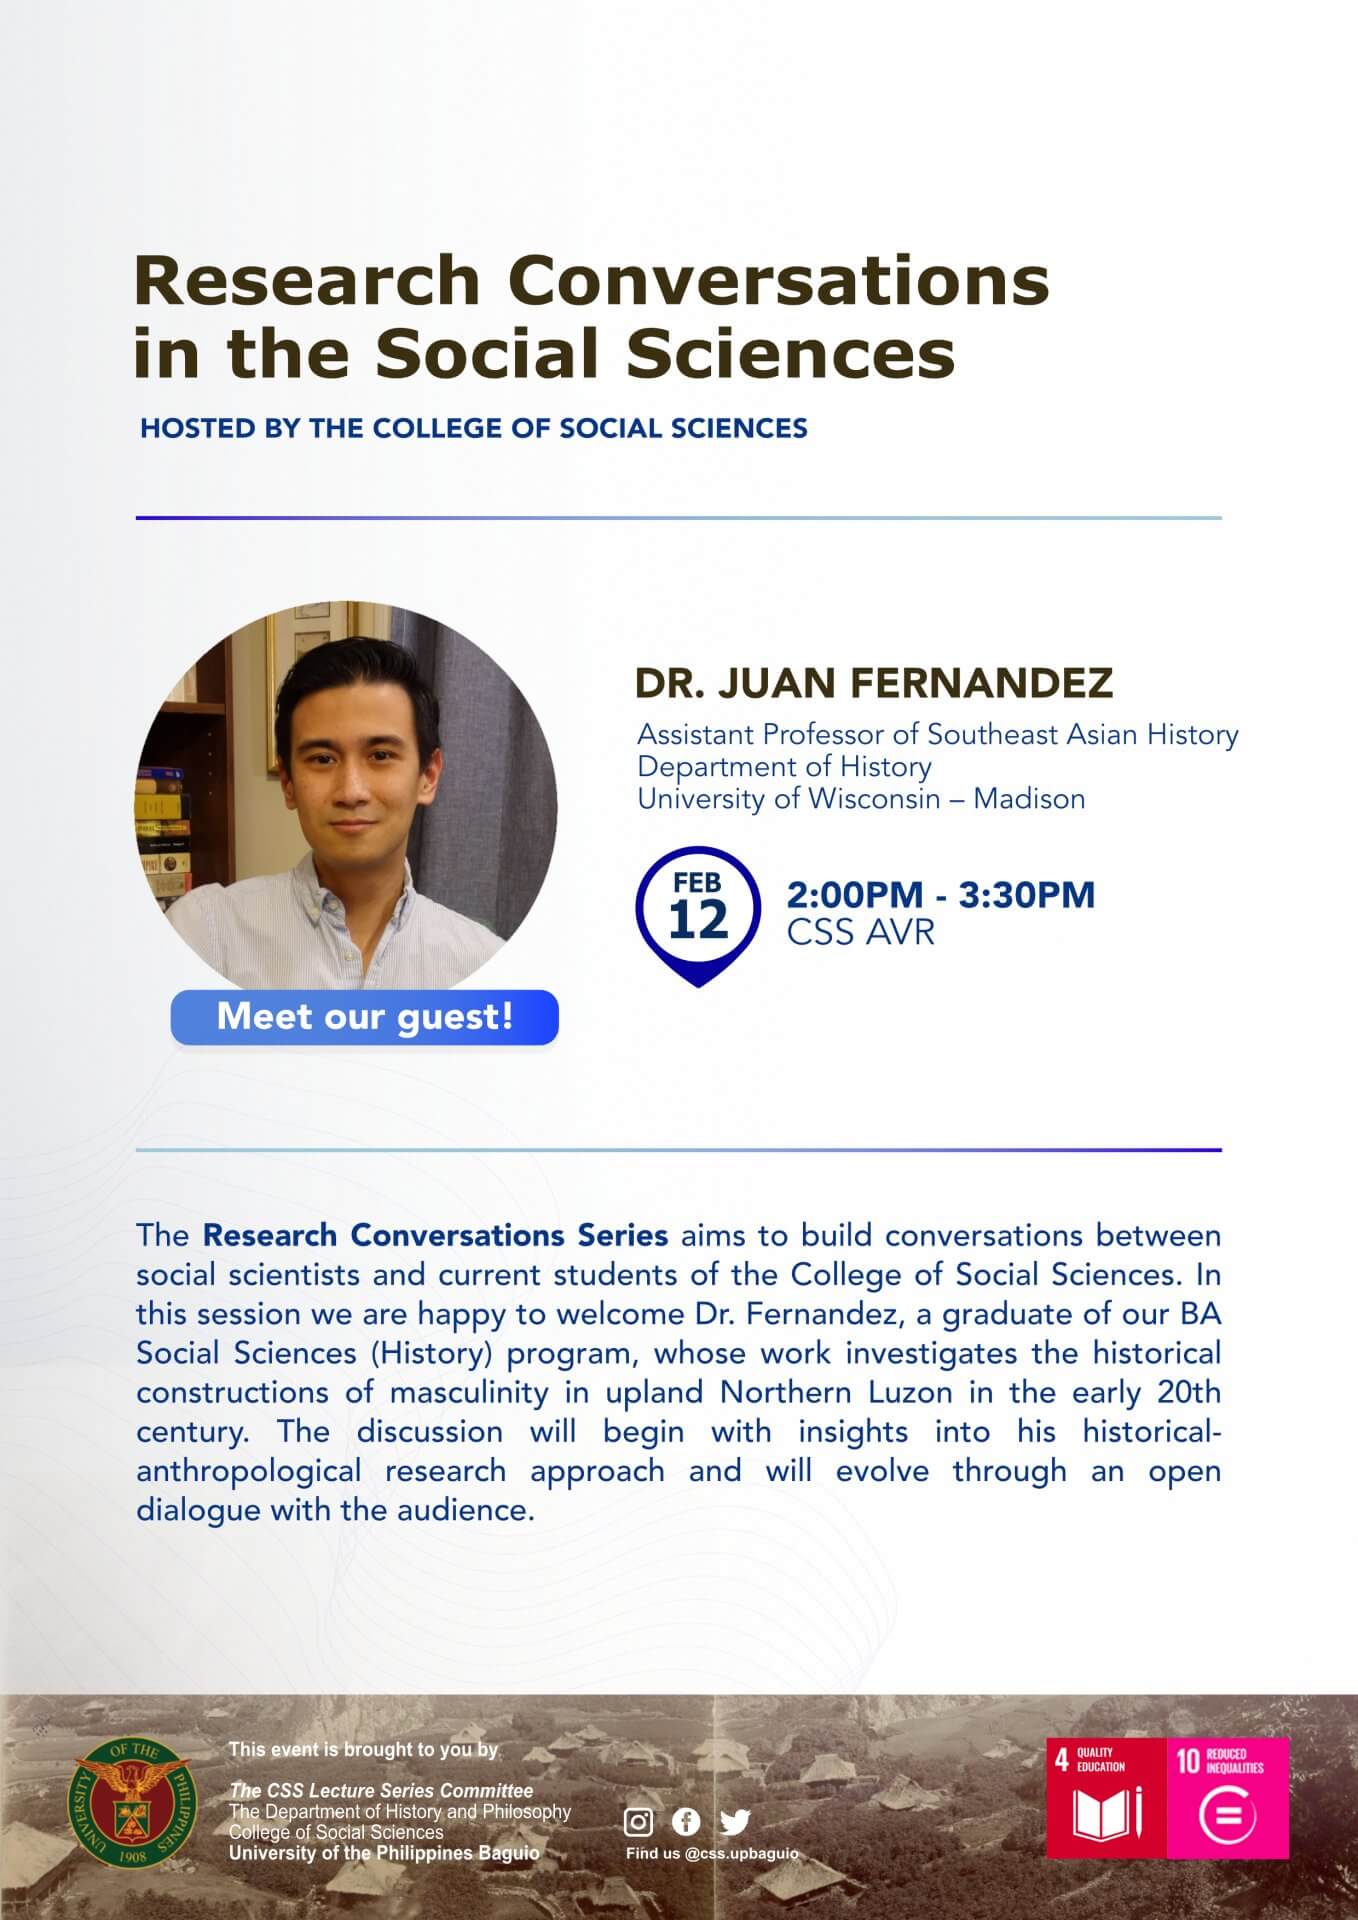 Research Conversations in the Social Sciences